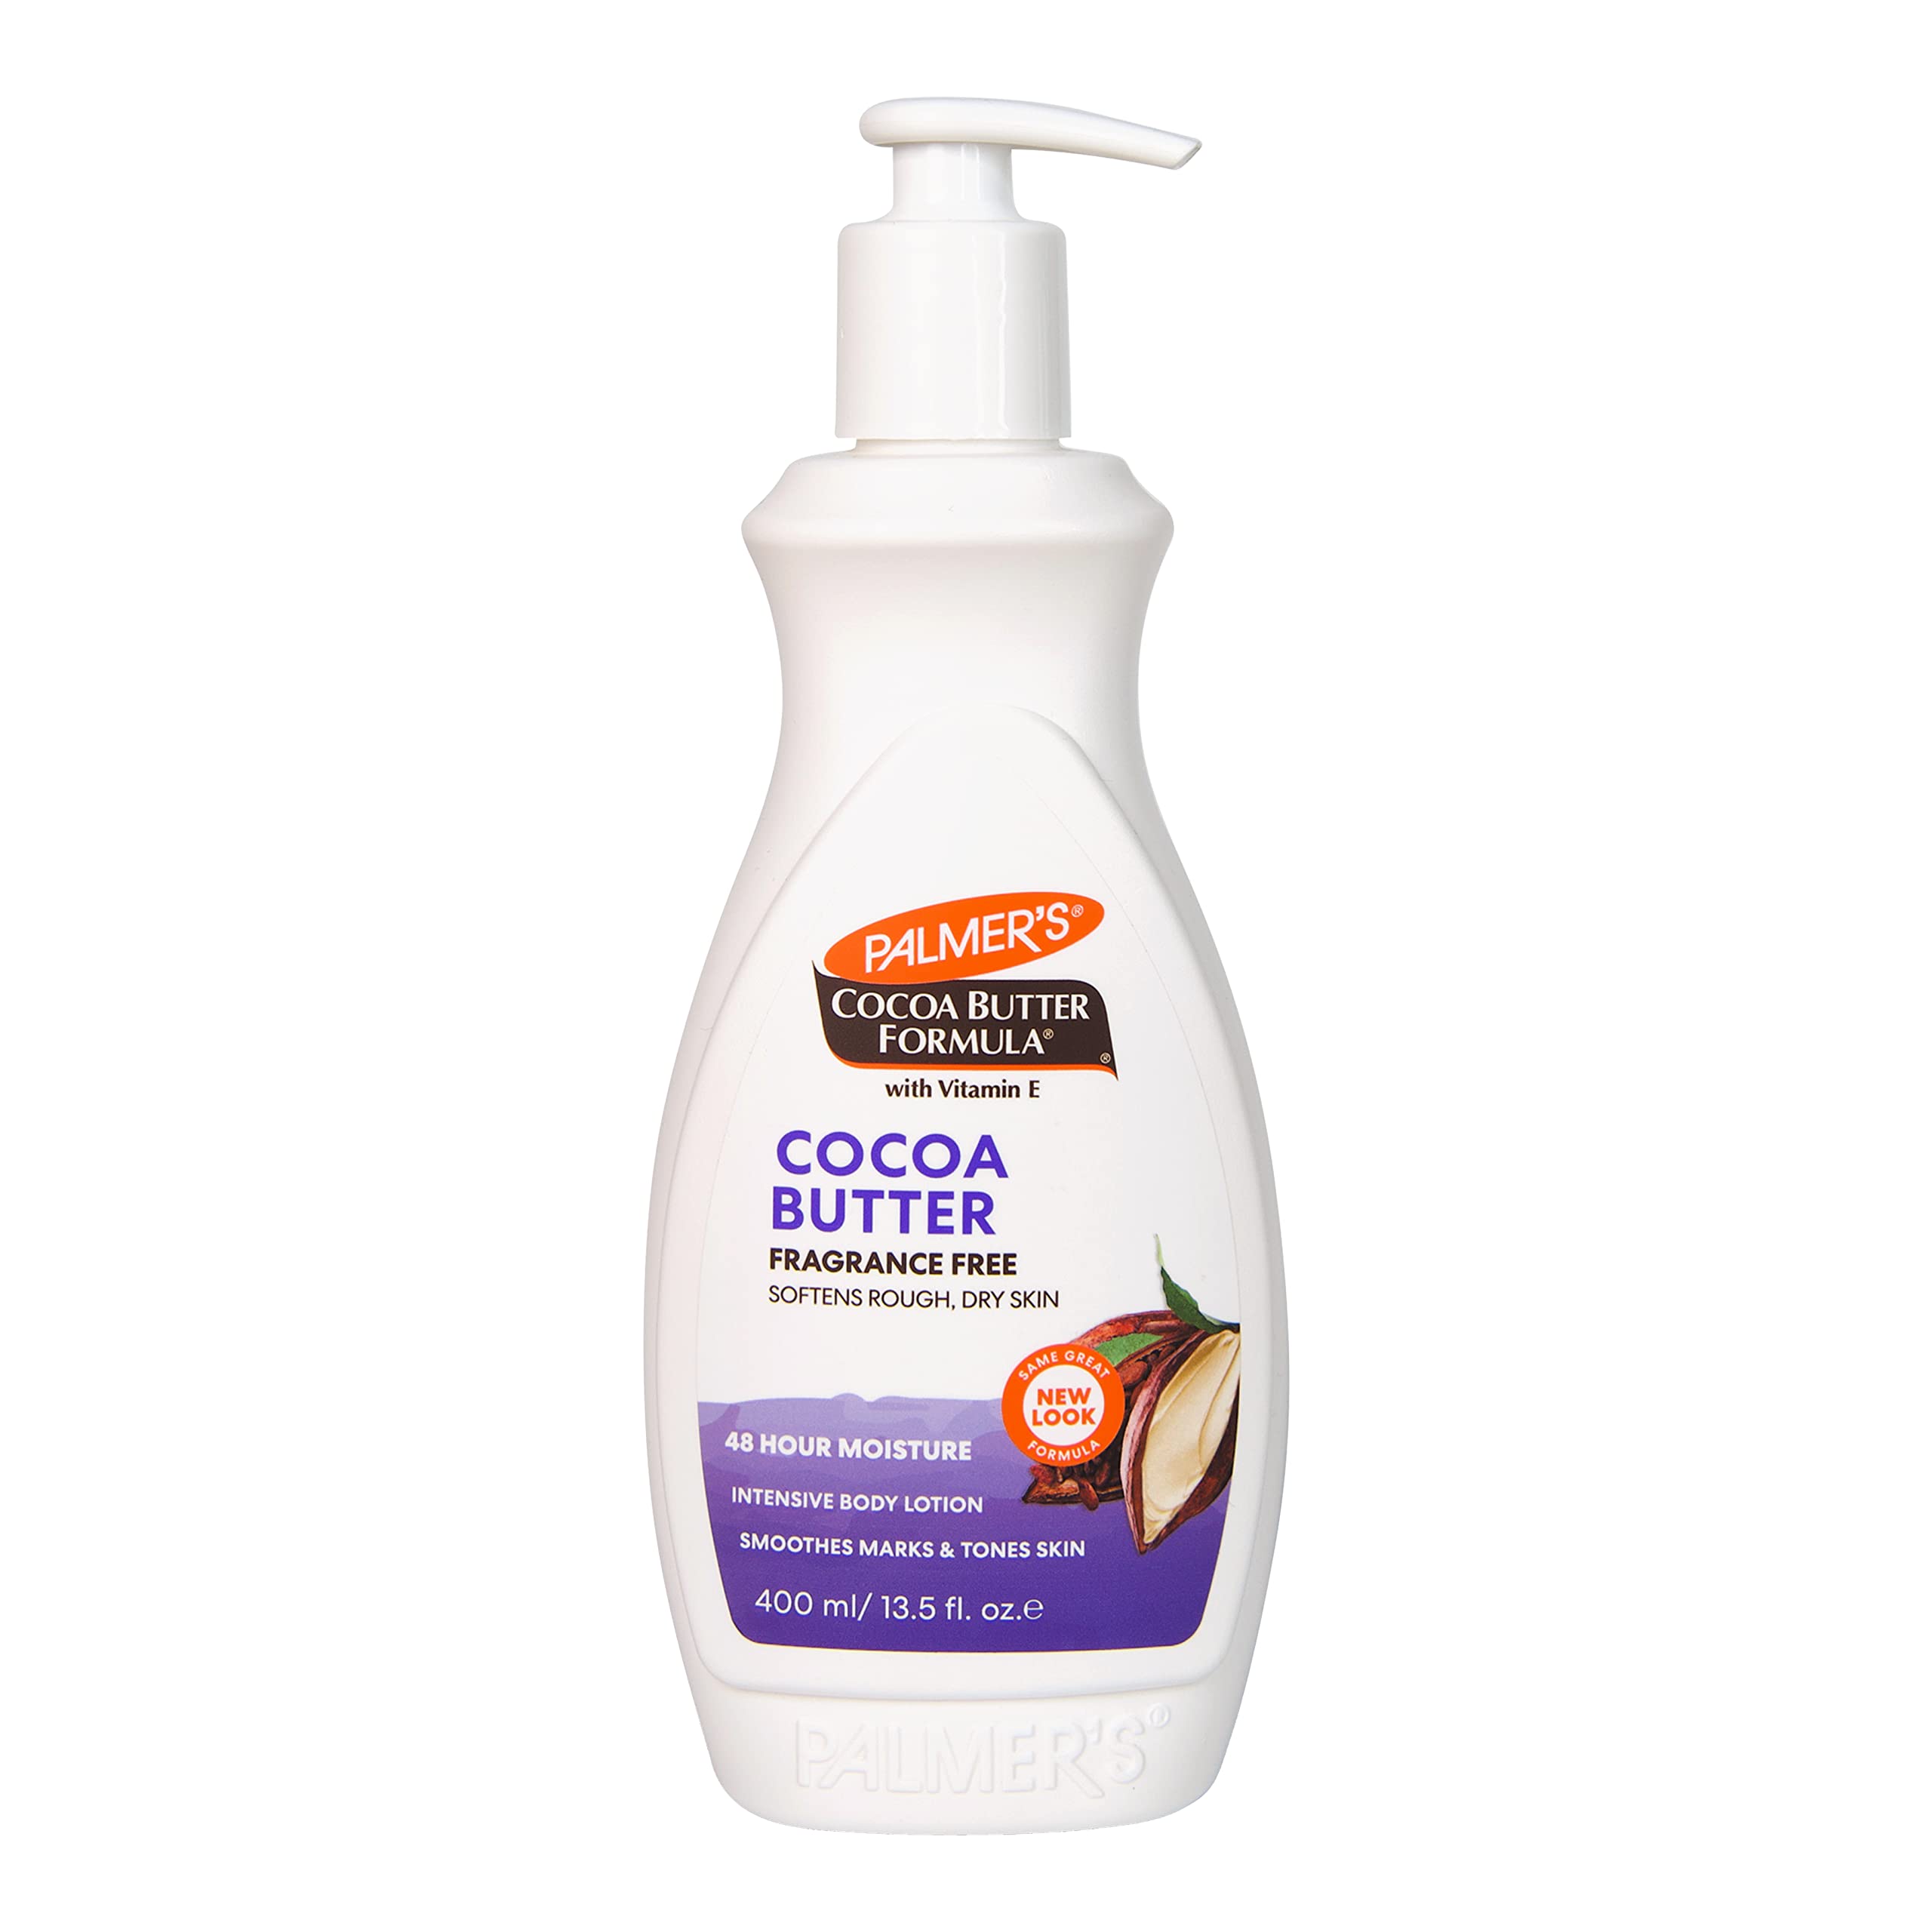 Palmer's Cocoa Butter Formula Daily Skin Therapy Fragrance Free